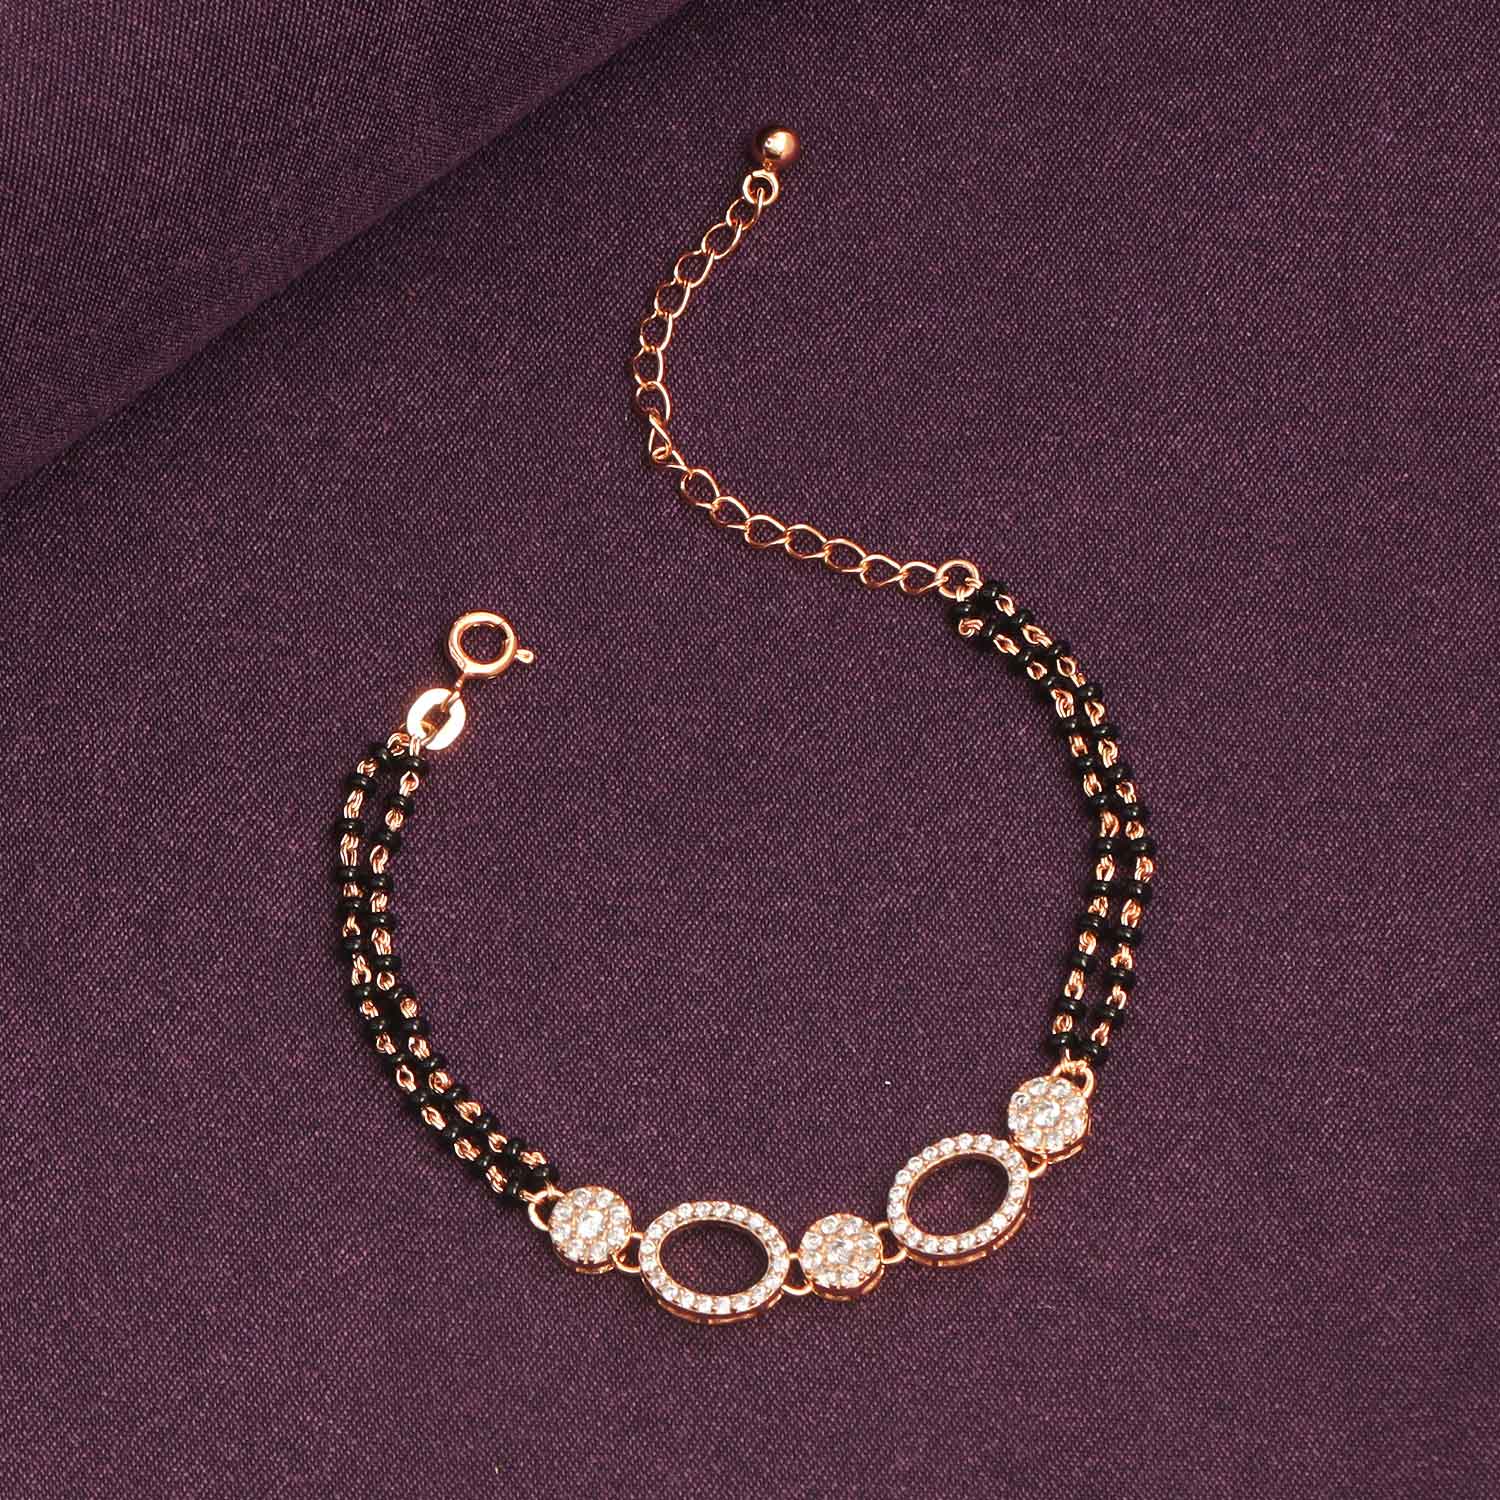 925 Sterling Silver 14K Rose Gold Plated Cubic Zirconia  Adjustable Commitment Mangalsutra Bracelet for Women